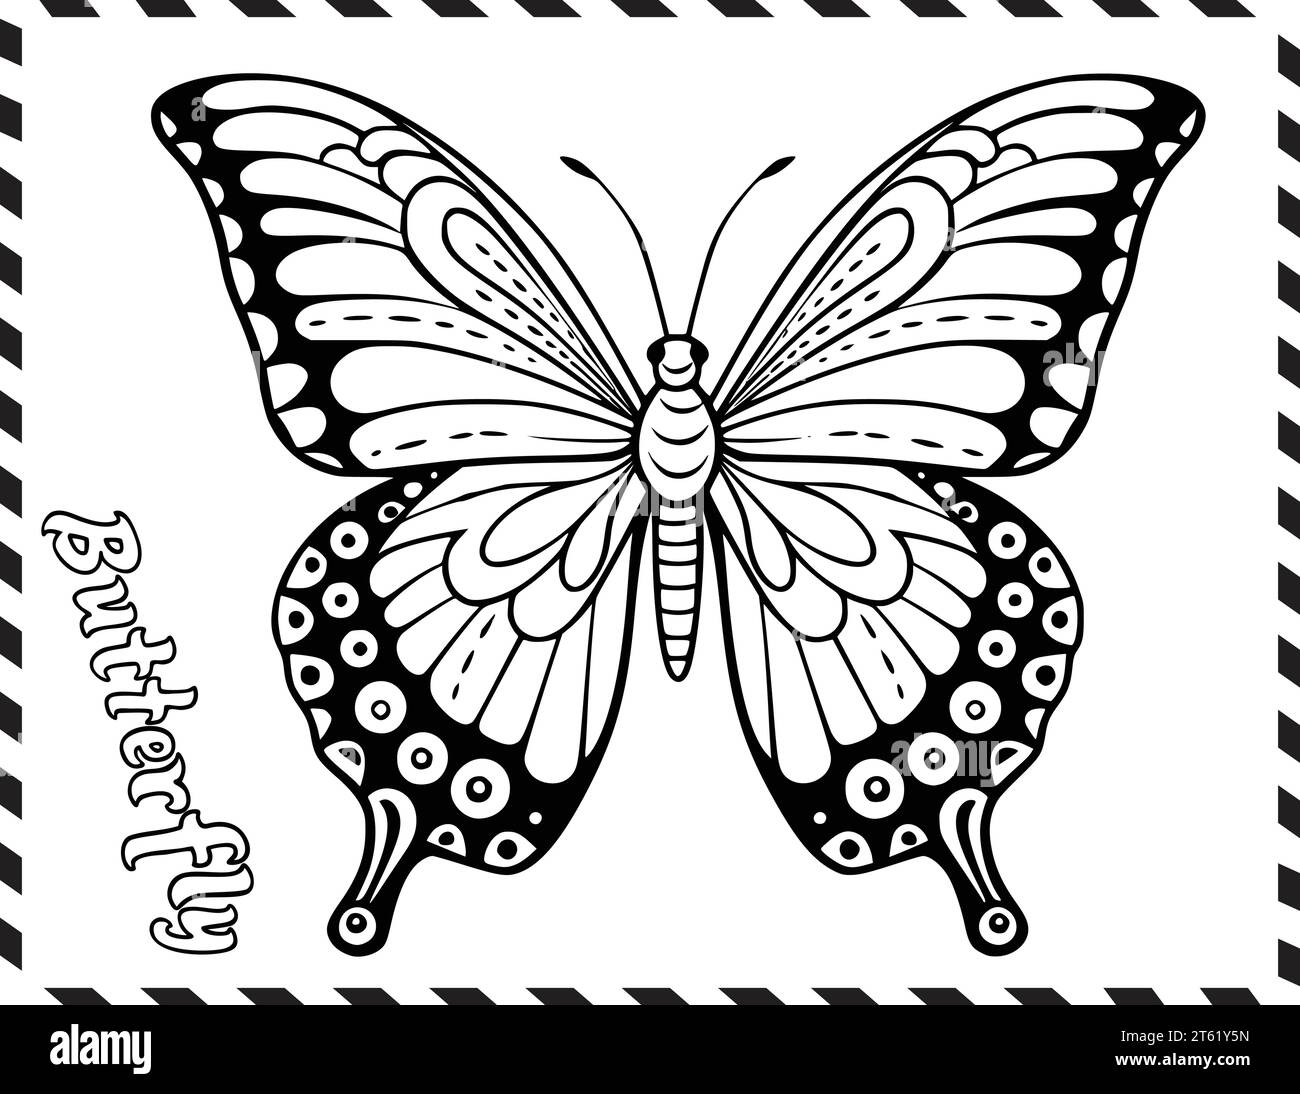 Cute Butterfly Coloring Page Drawing For Kids Stock Vector